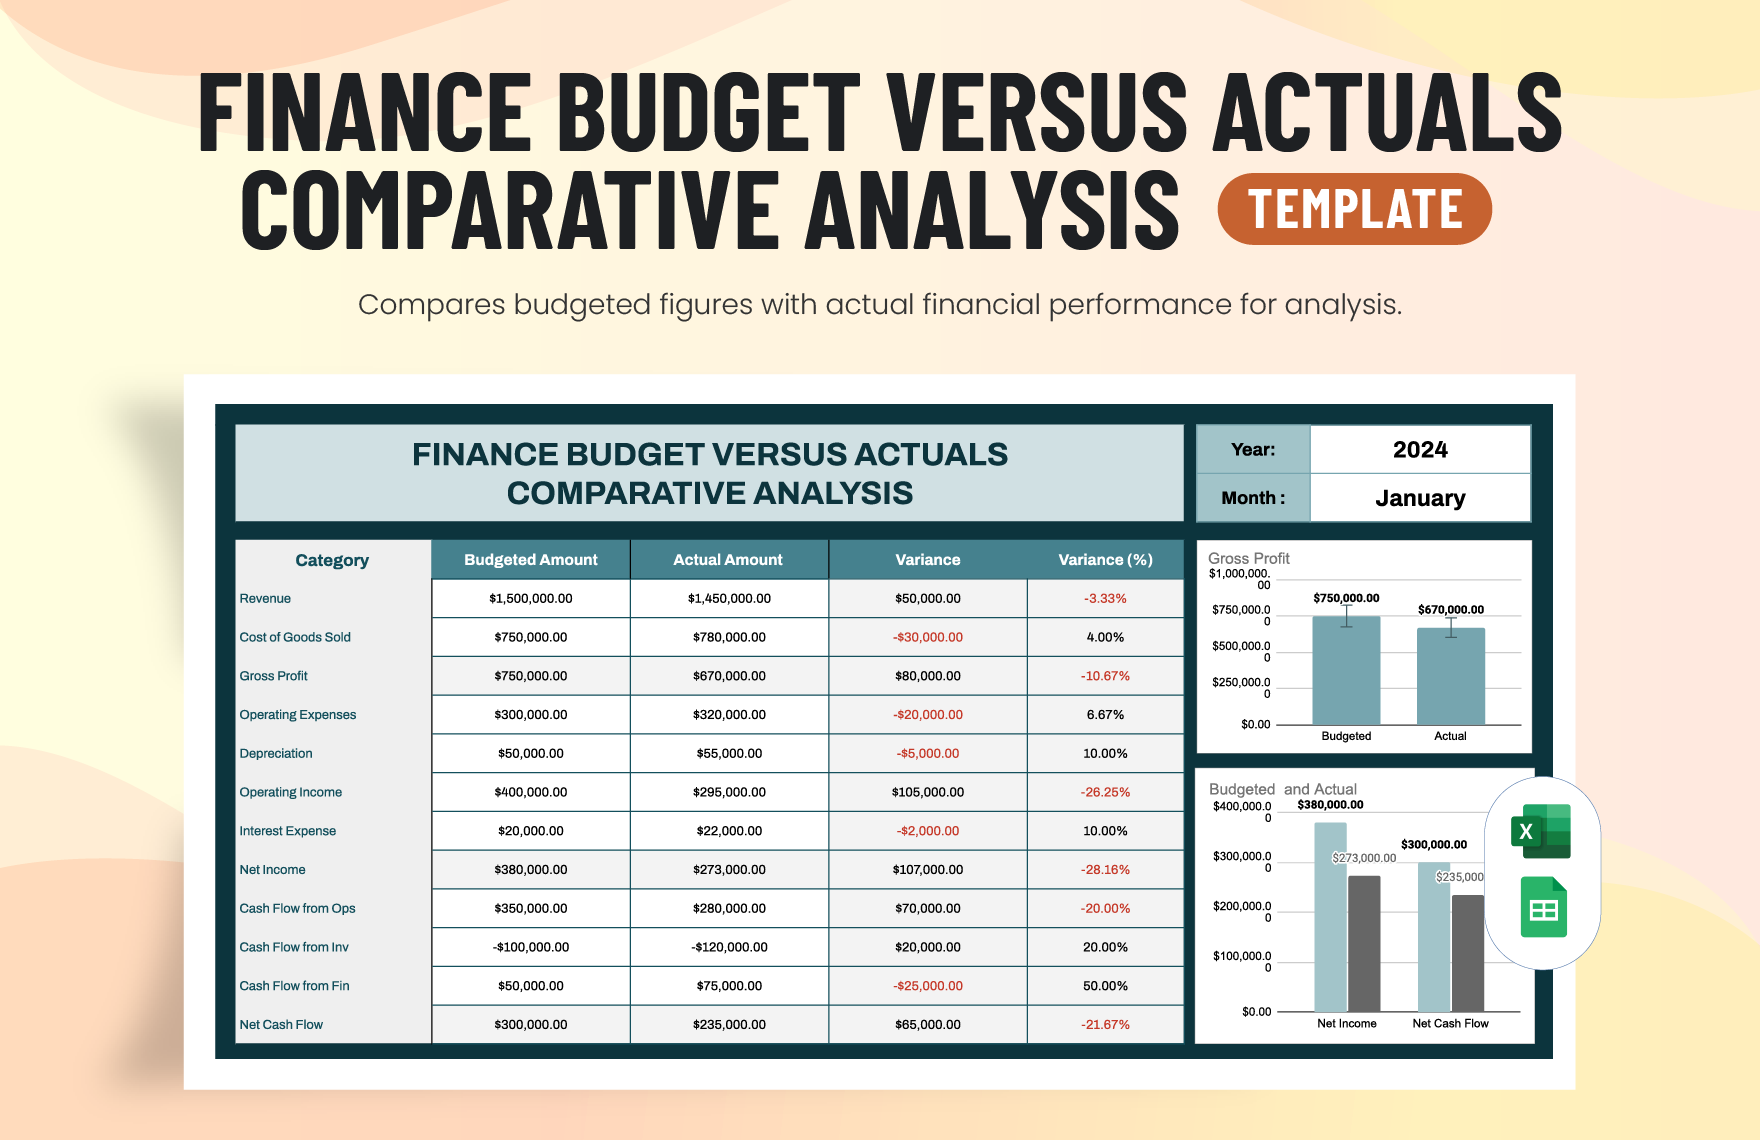 Finance Budget versus Actuals Comparative Analysis Template in Excel, Google Sheets